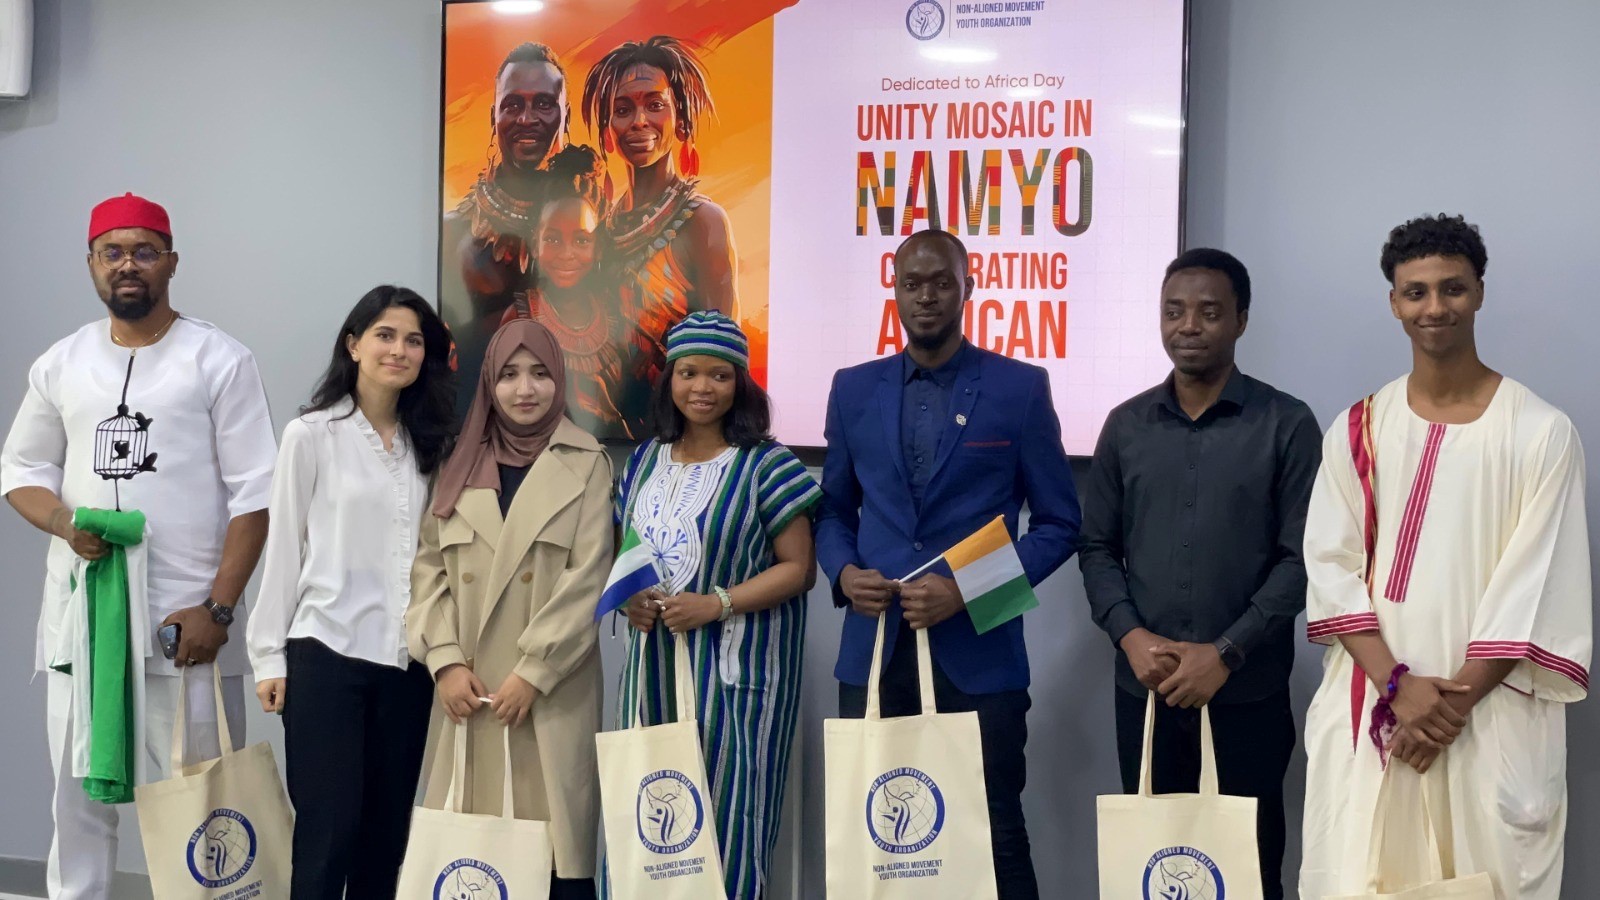 Mosaic of Unity in the Non-Aligned Movement Youth Organization: Africa Day Celebration Event Held